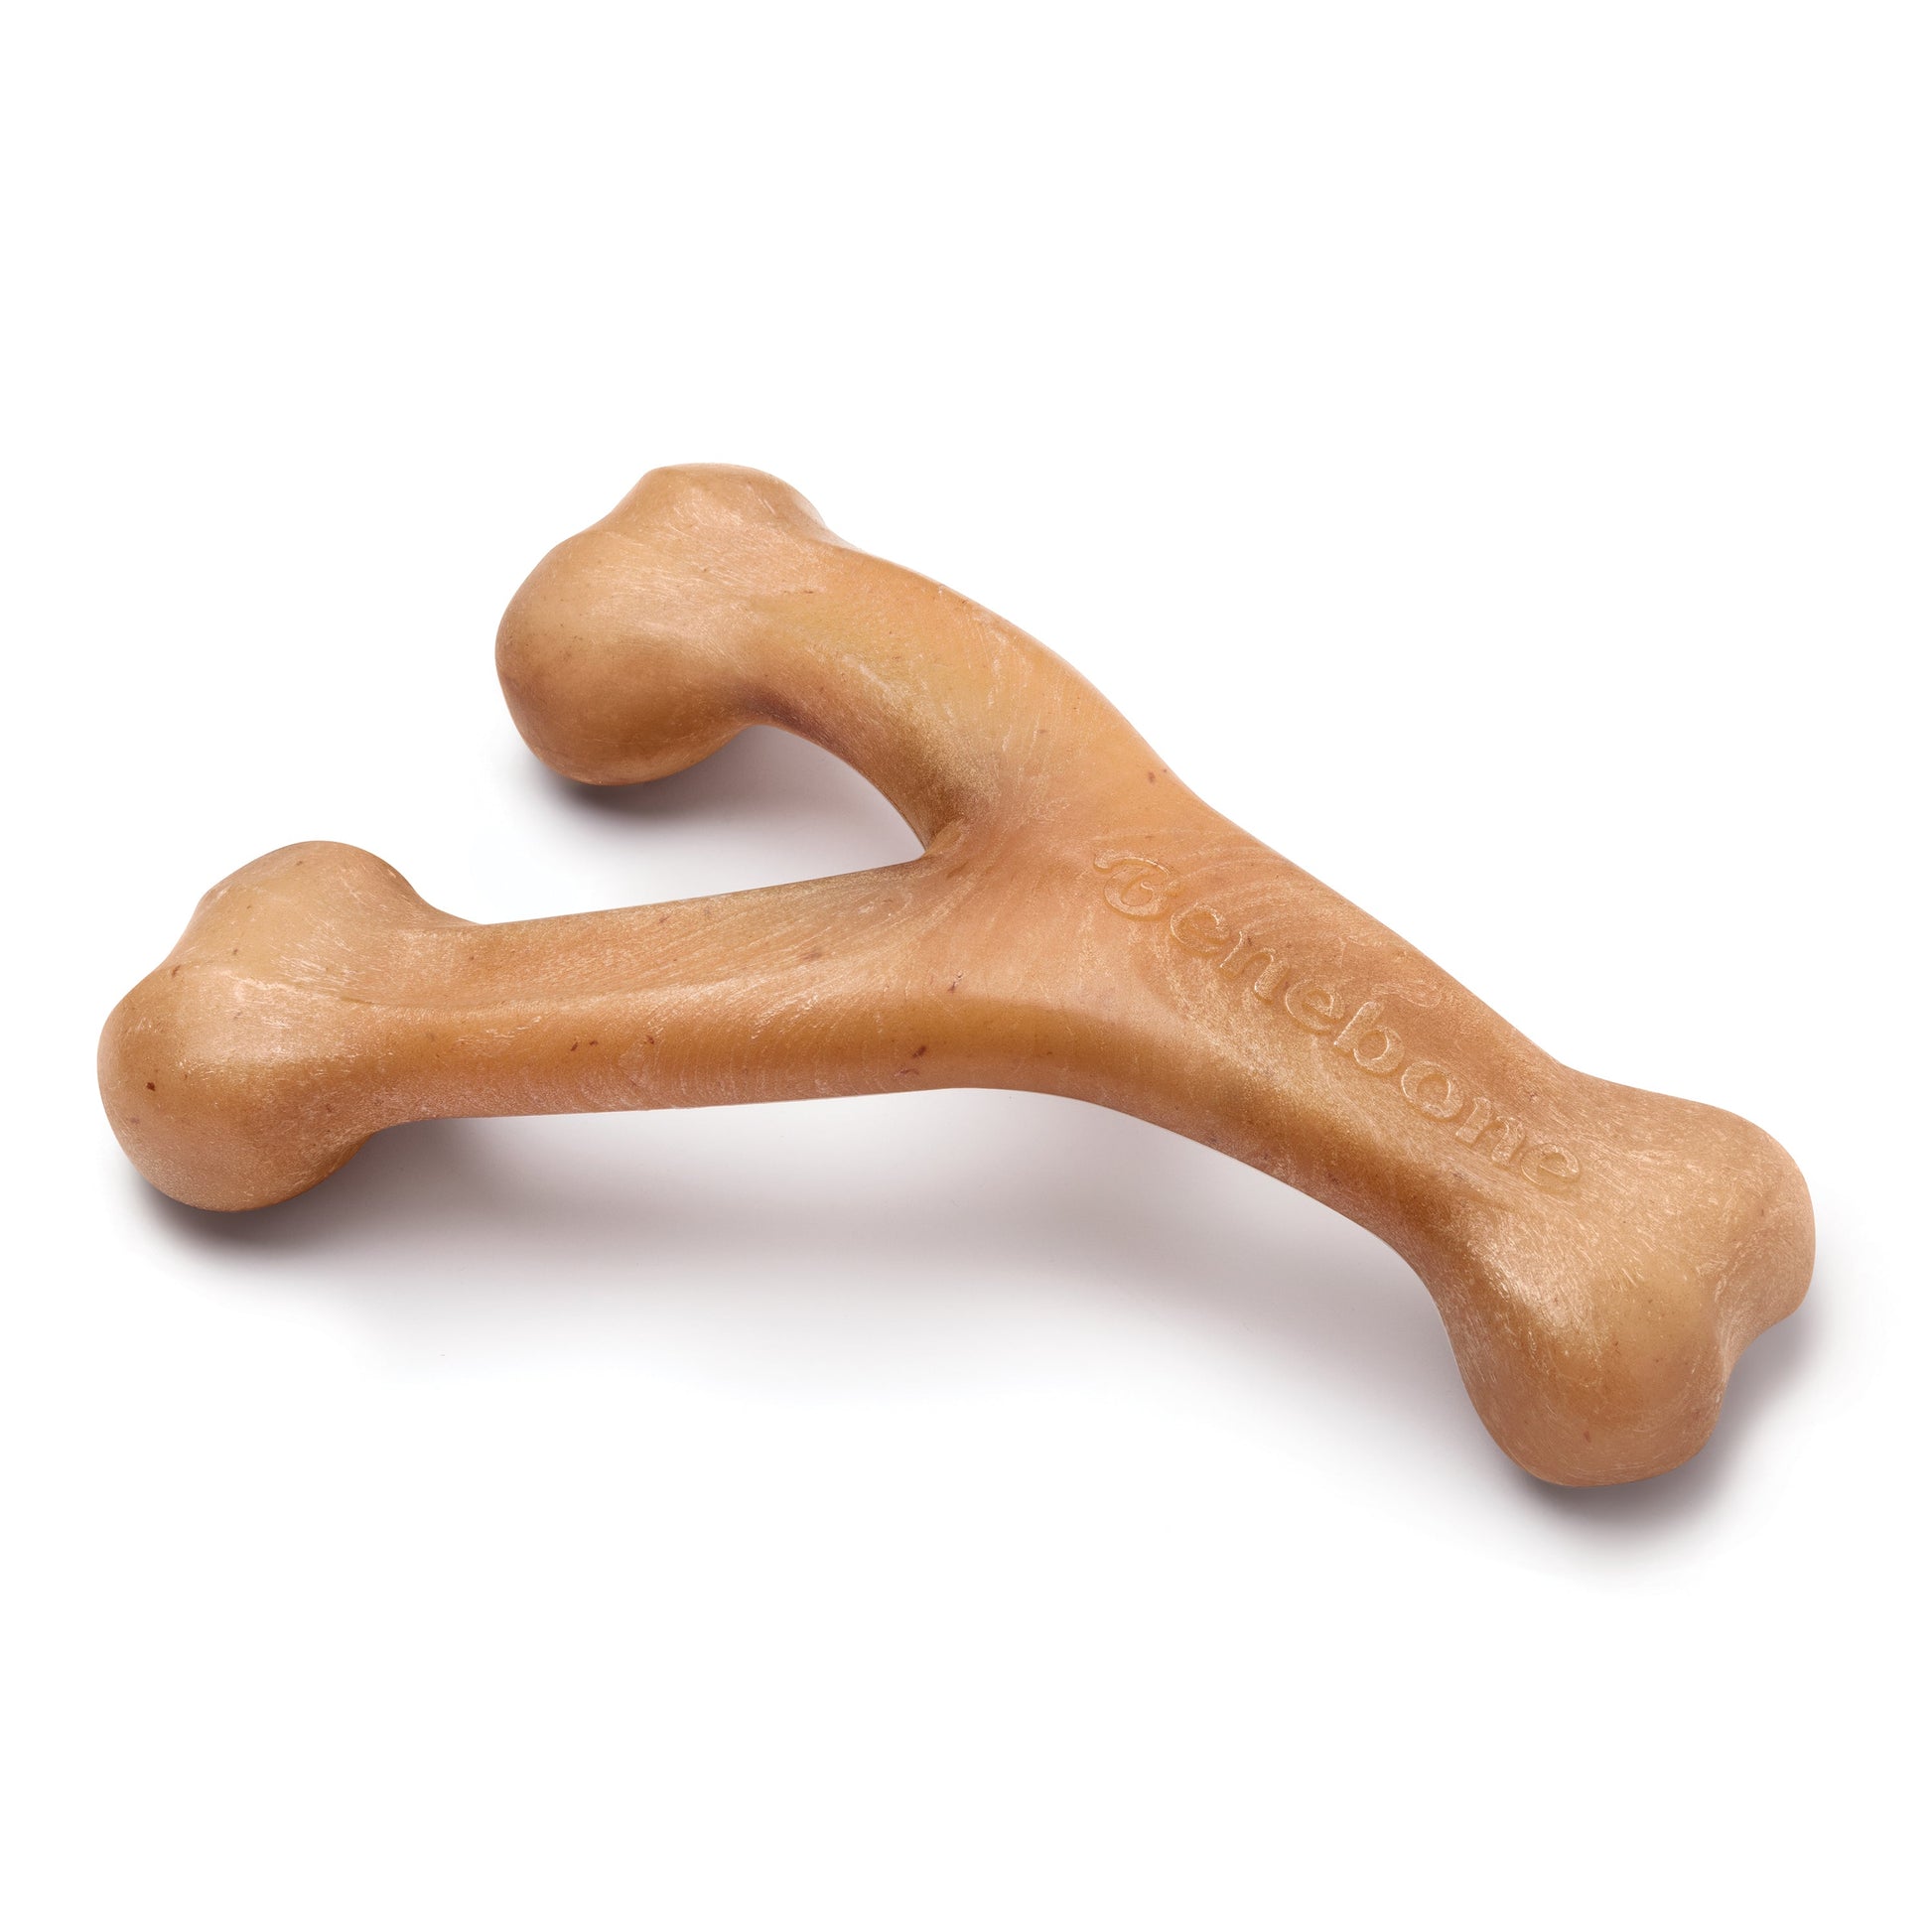 4 Must-Have Products for Teething Puppies: Rings, Bones, and More